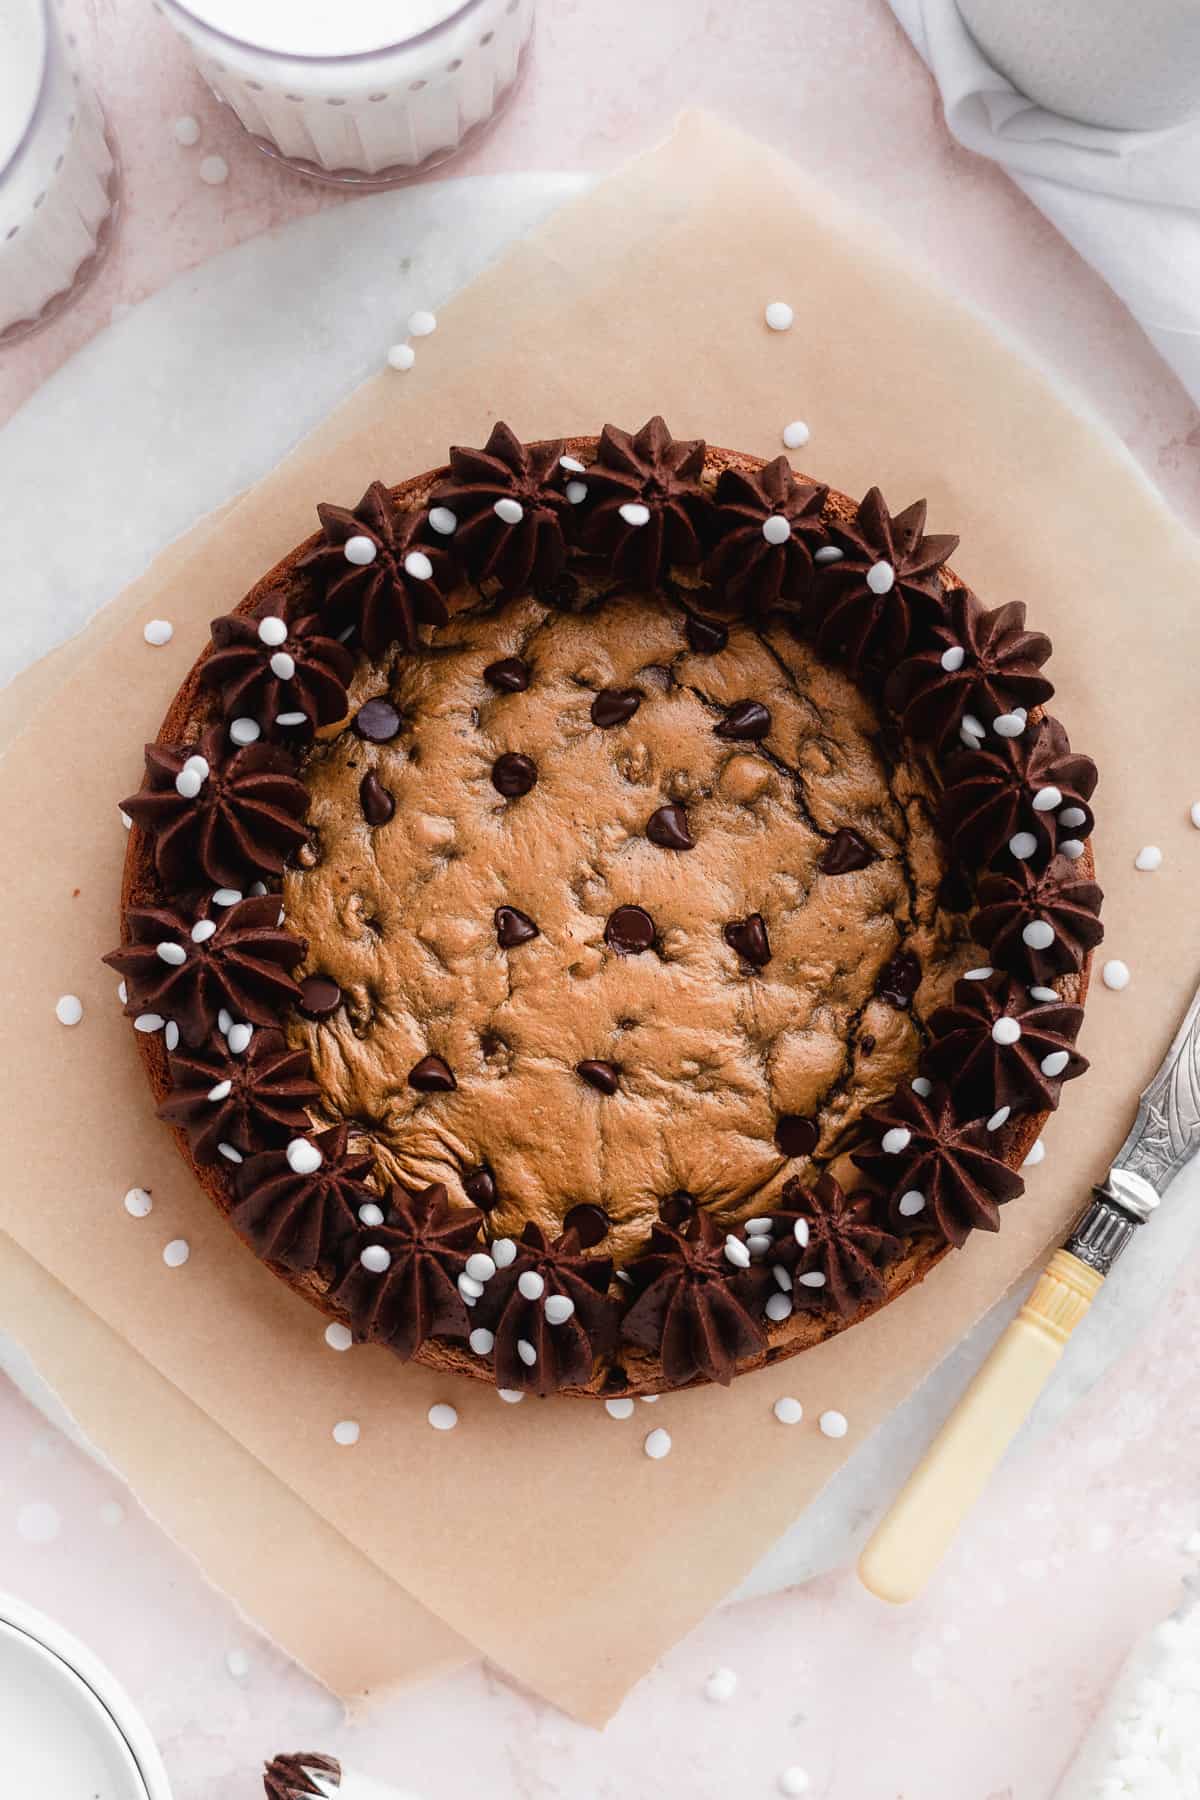 Overhead photo of round chocolate chip cookie cake with chocolate frosting piped around the edges.  Silver knife with pearl handle is resting nearby.  Cake is sitting on parchment paper on a white marble slab.  